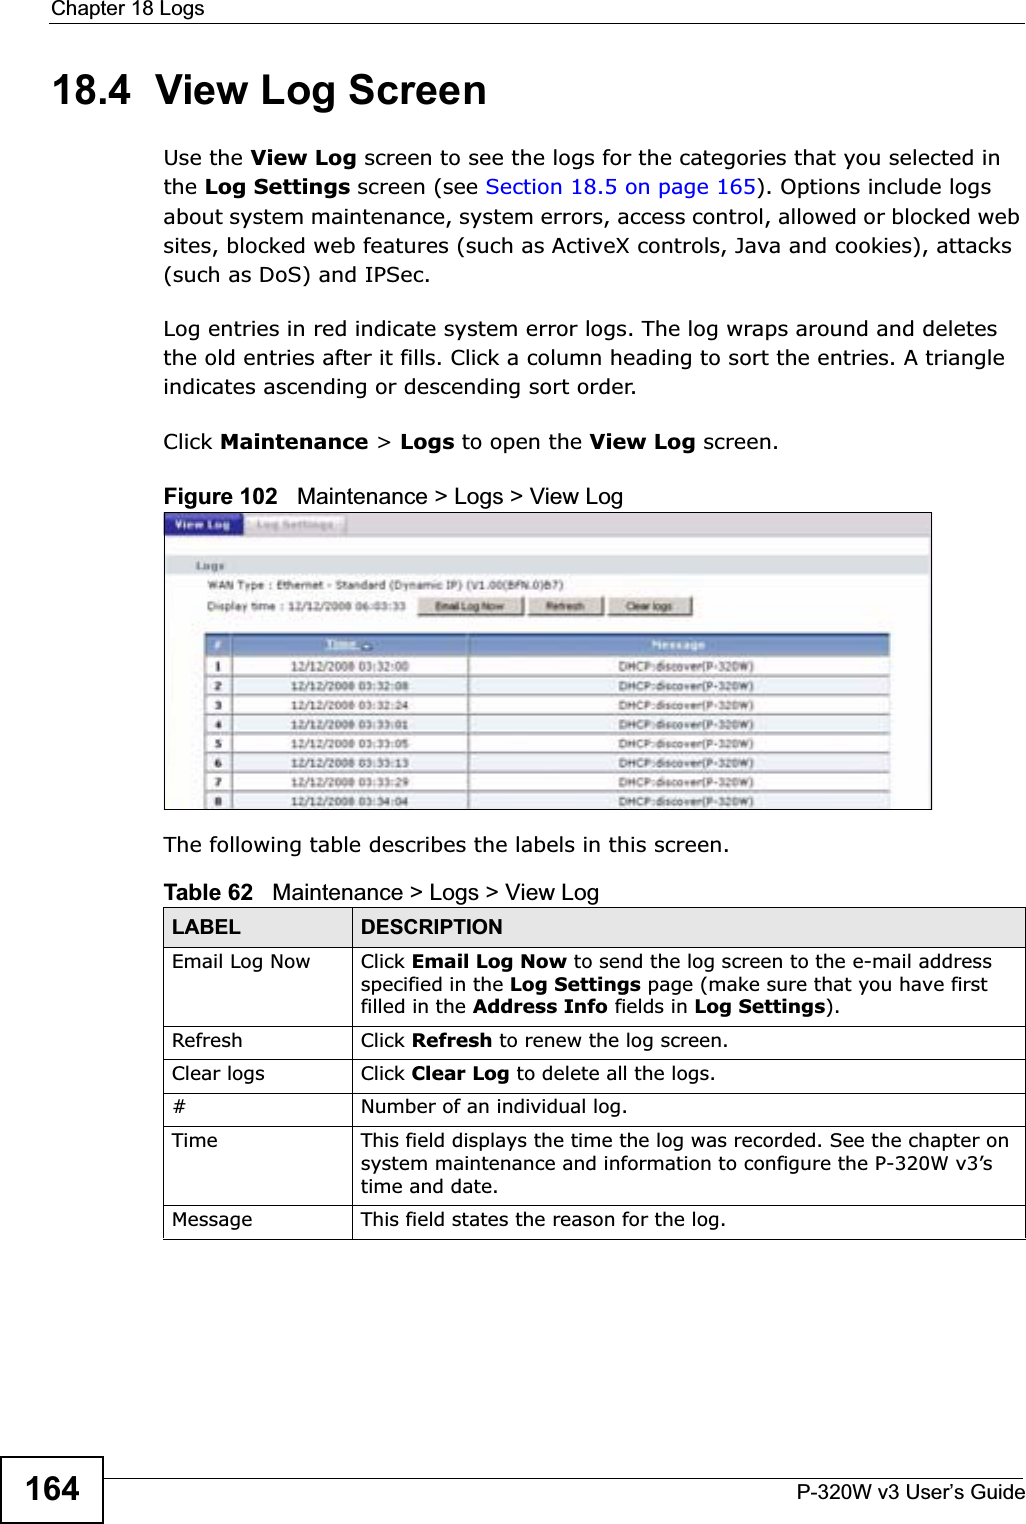 Chapter 18 LogsP-320W v3 User’s Guide16418.4  View Log ScreenUse the View Log screen to see the logs for the categories that you selected in the Log Settings screen (see Section 18.5 on page 165). Options include logs about system maintenance, system errors, access control, allowed or blocked web sites, blocked web features (such as ActiveX controls, Java and cookies), attacks (such as DoS) and IPSec.Log entries in red indicate system error logs. The log wraps around and deletes the old entries after it fills. Click a column heading to sort the entries. A triangle indicates ascending or descending sort order. Click Maintenance &gt; Logs to open the View Log screen.Figure 102   Maintenance &gt; Logs &gt; View Log The following table describes the labels in this screen.Table 62   Maintenance &gt; Logs &gt; View LogLABEL DESCRIPTIONEmail Log Now  Click Email Log Now to send the log screen to the e-mail address specified in the Log Settings page (make sure that you have first filled in the Address Info fields in Log Settings).Refresh Click Refresh to renew the log screen. Clear logs  Click Clear Log to delete all the logs. #Number of an individual log.Time This field displays the time the log was recorded. See the chapter on system maintenance and information to configure the P-320W v3’s time and date.Message This field states the reason for the log.